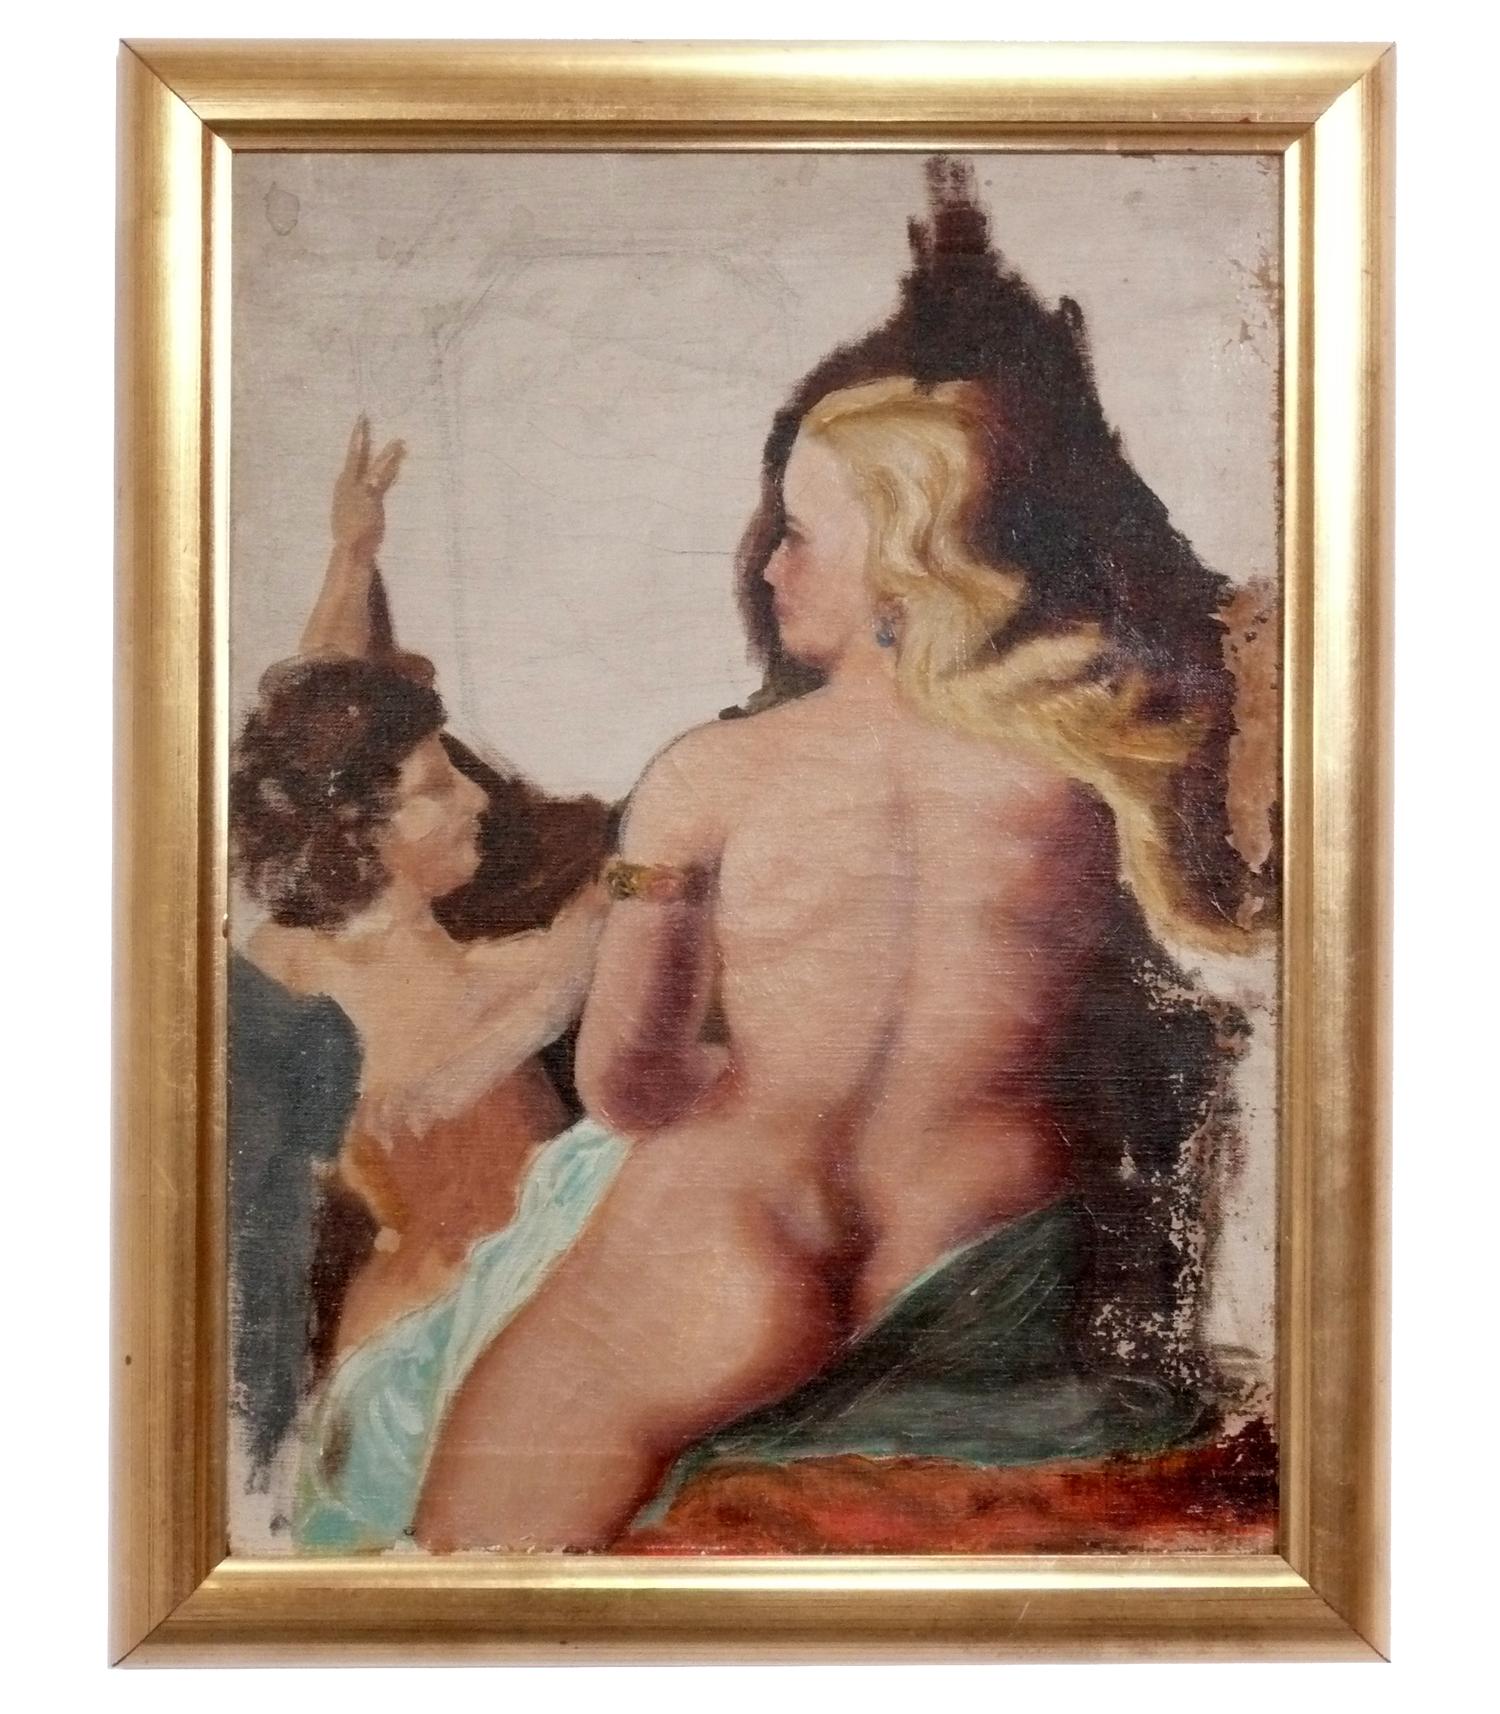 Selection of Original Female Nude Paintings, probably American, circa 1950s. They are priced at $750 each. Neither work is signed. They have both been professionally framed in vintage gilt frames. The larger painting on the left measures 23